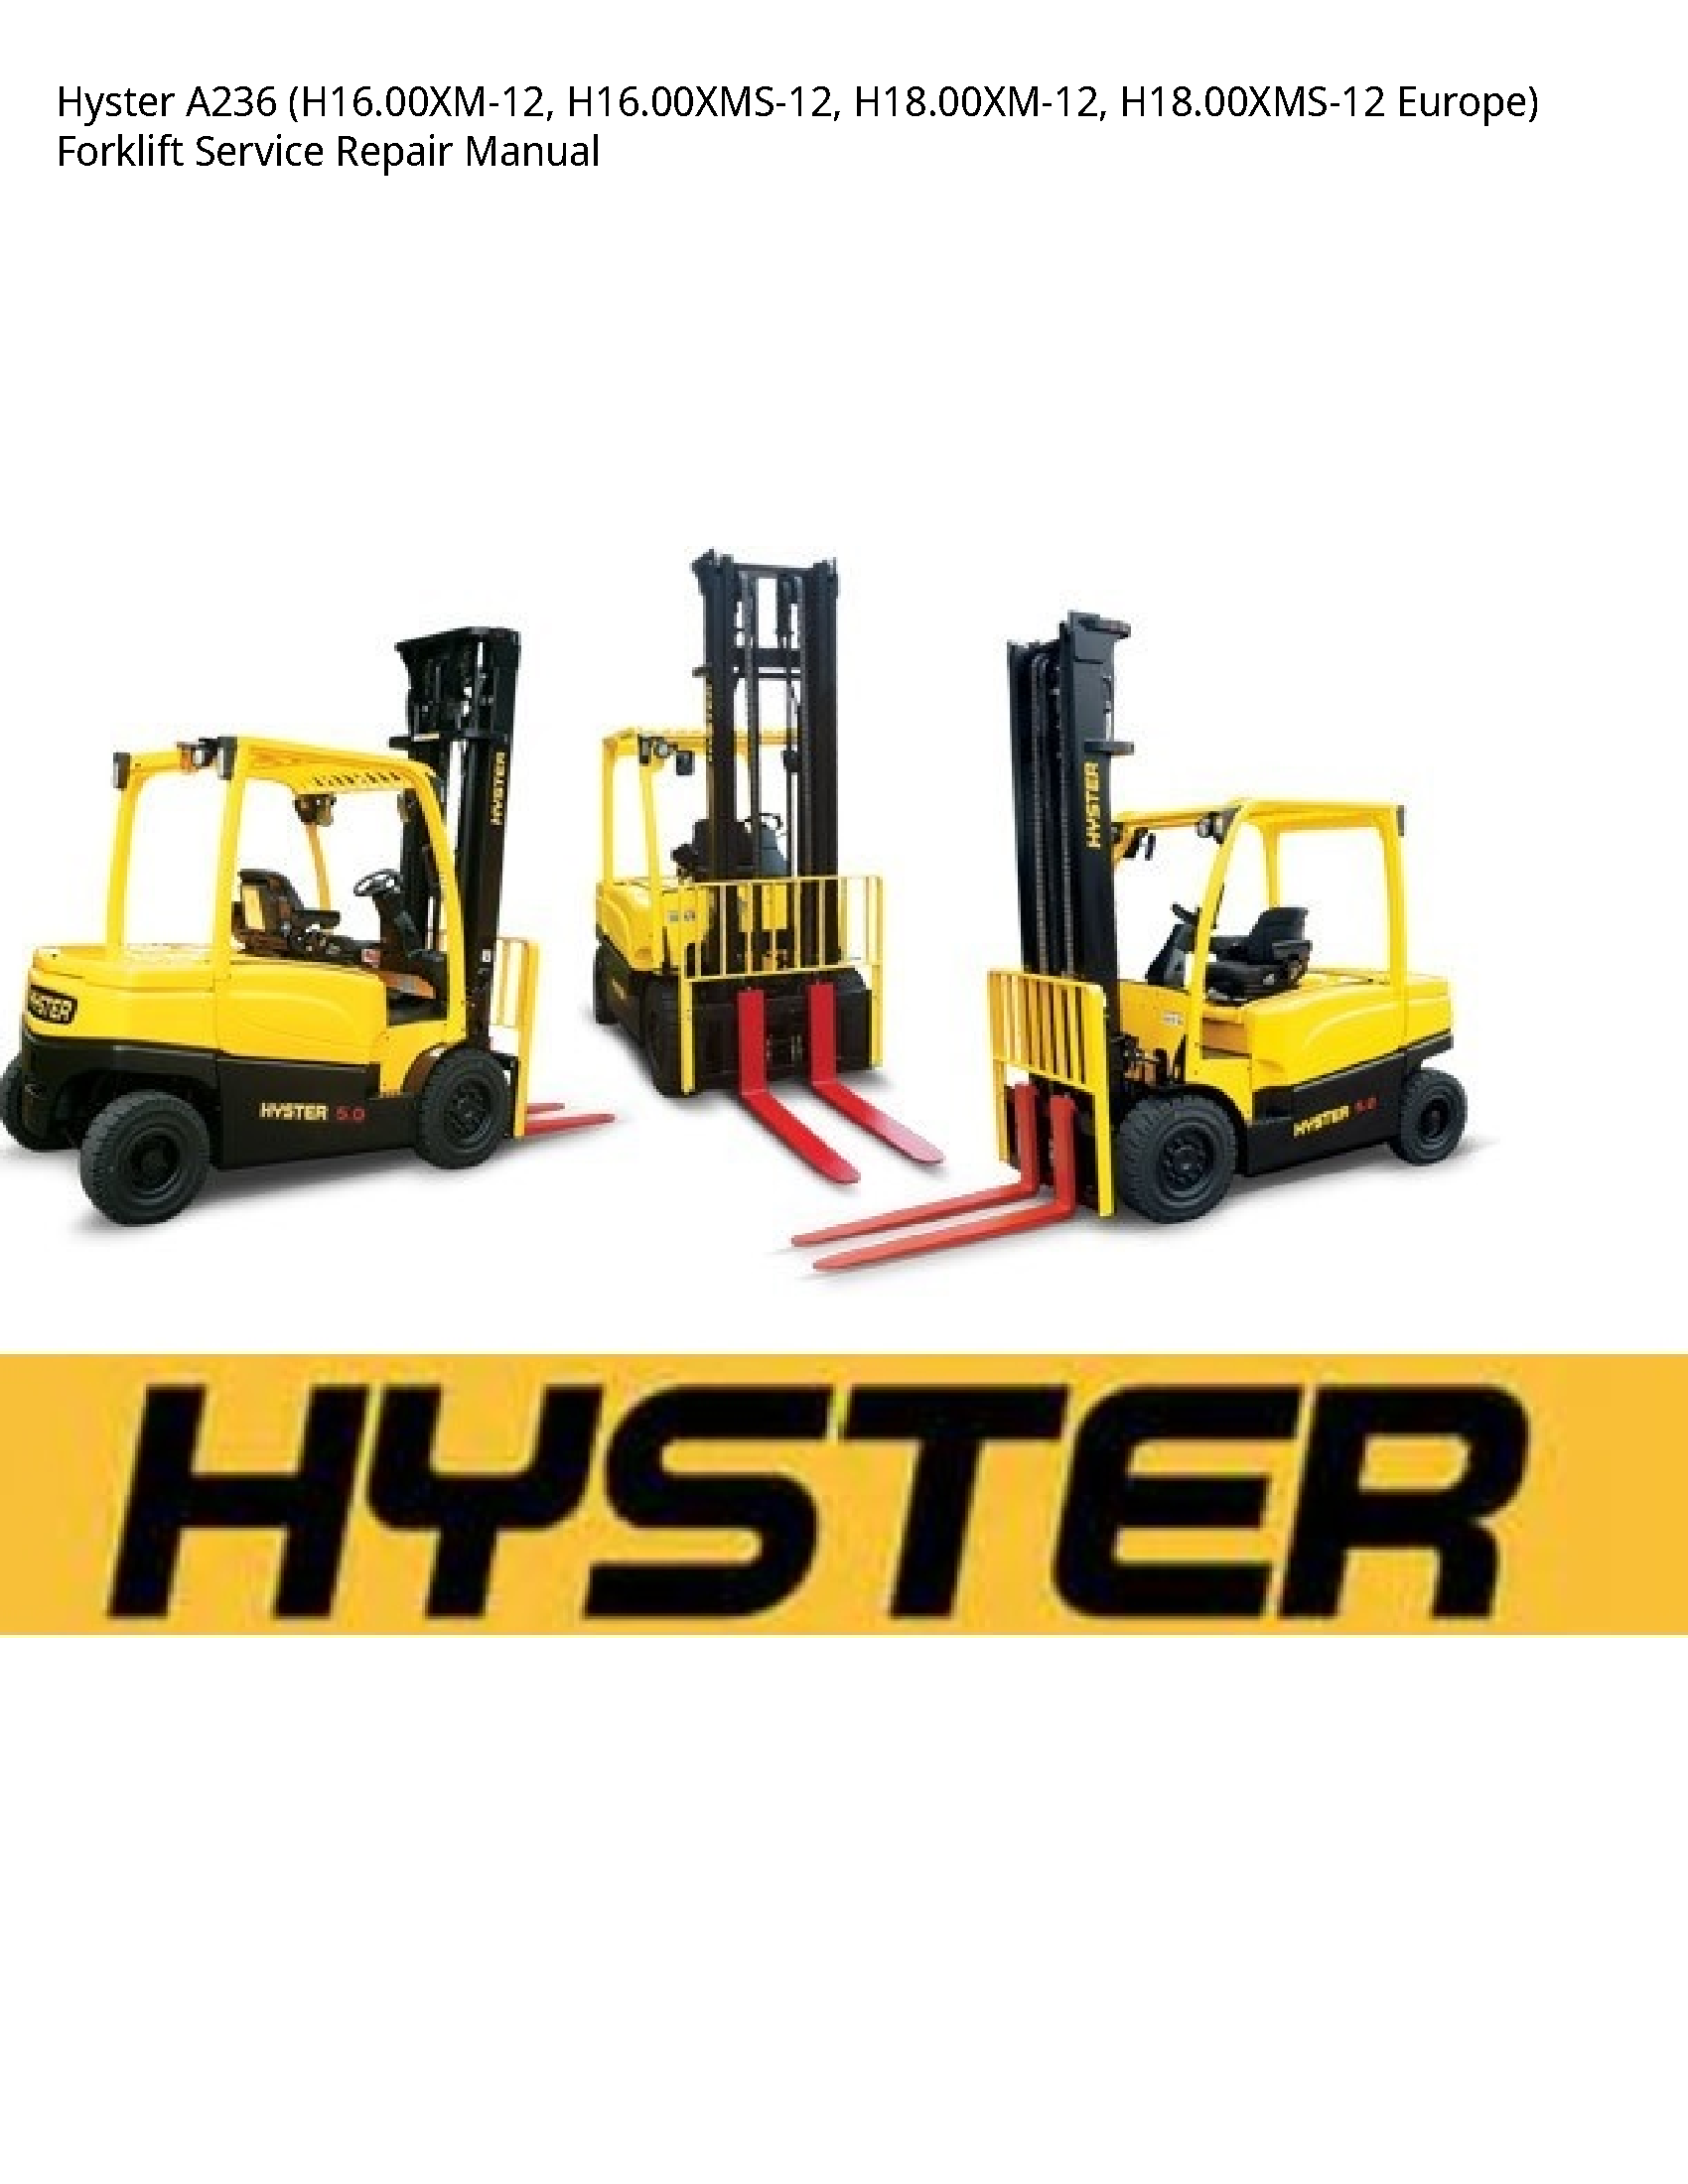 Hyster A236 Europe) Forklift manual